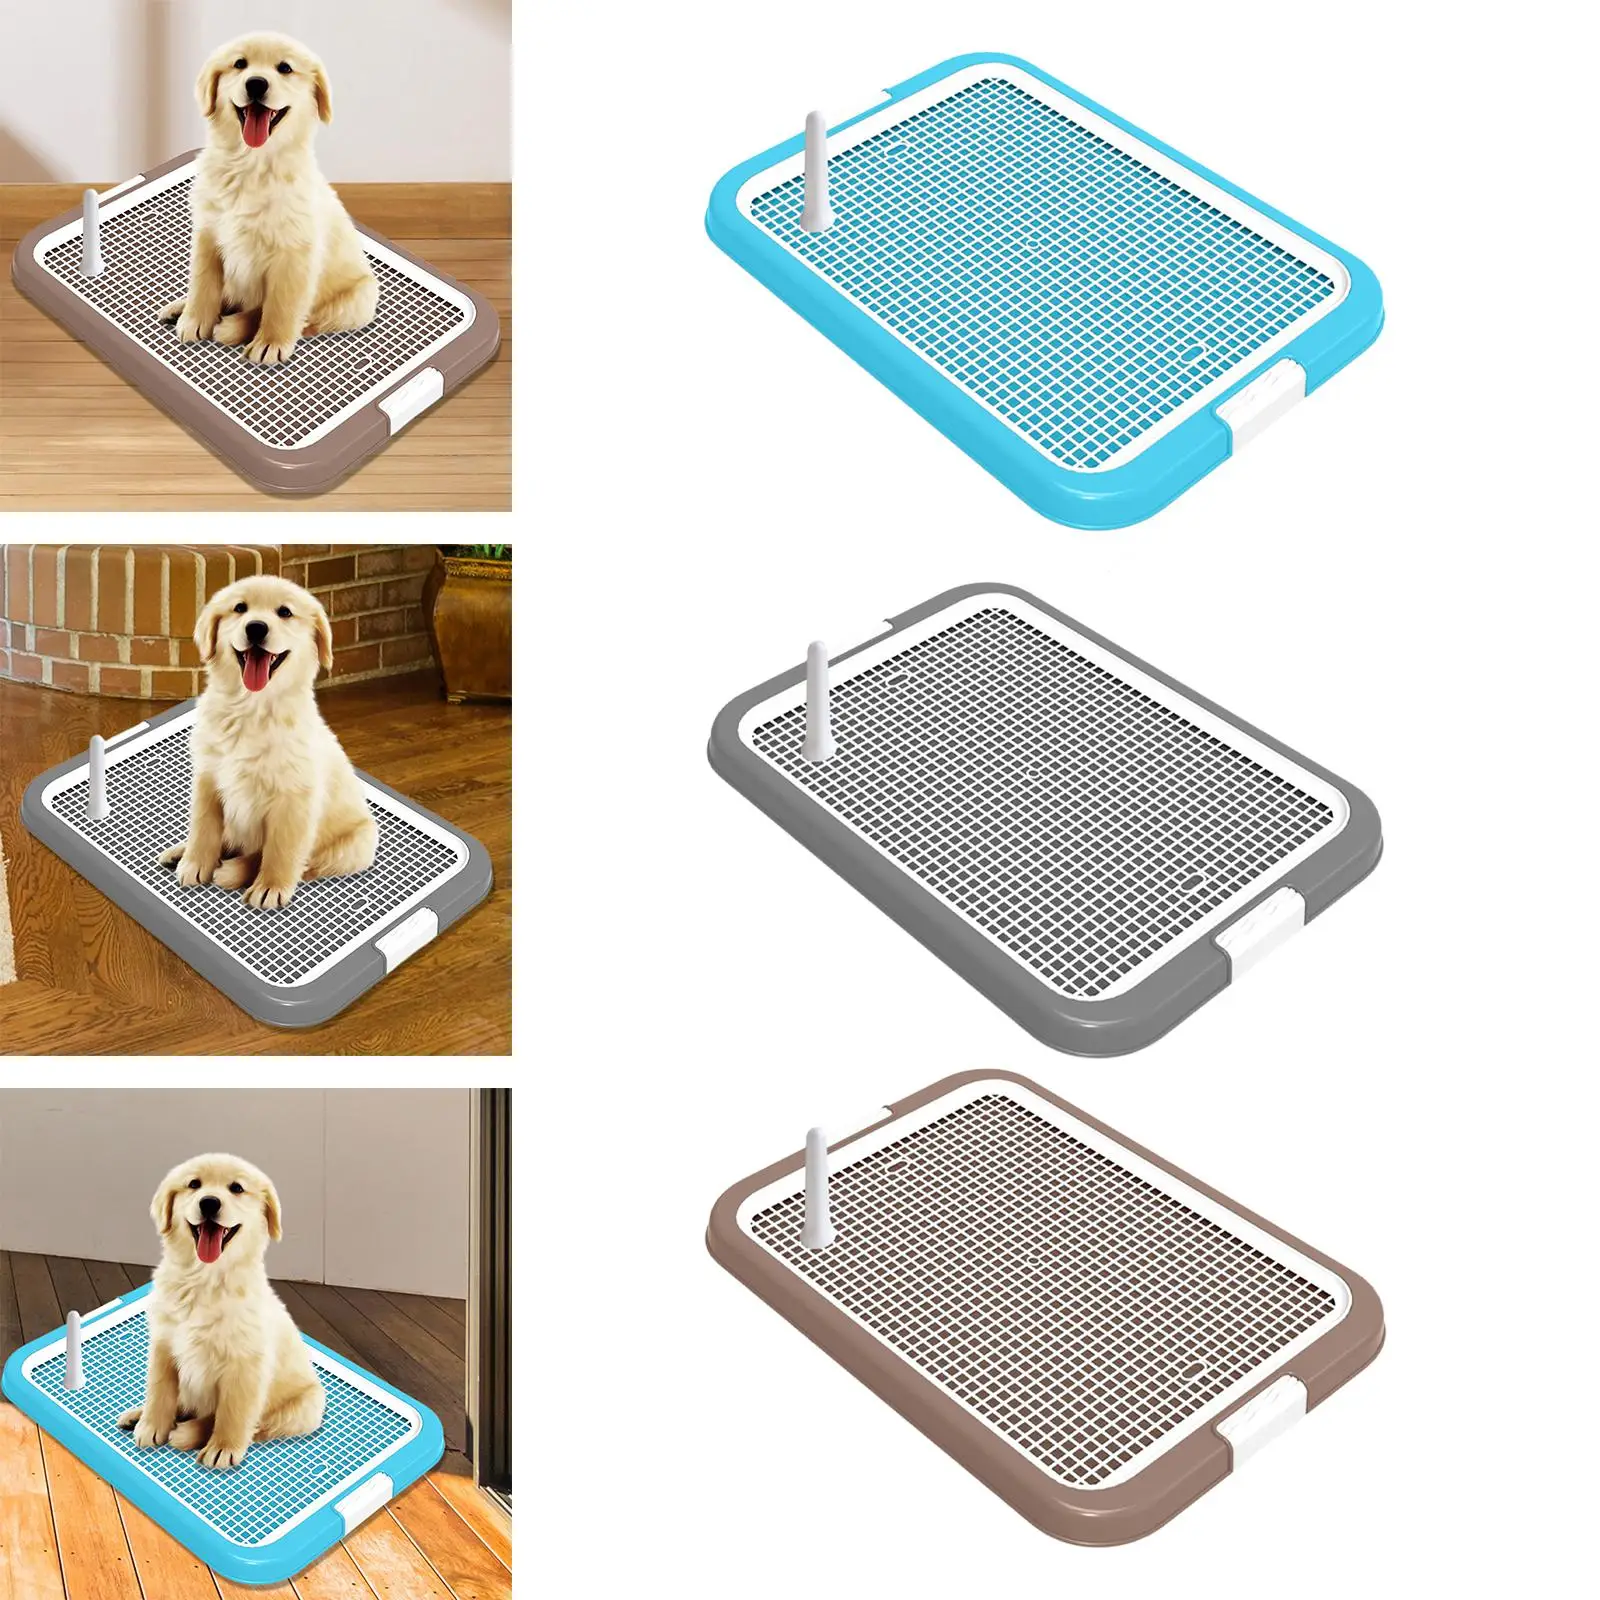 Dog Toilet Training Potty Tray Pee Pad Holder Trainer Toilette Pet Litter Box for Apartment Indoor Outdoor Puppy Kitten Bunny